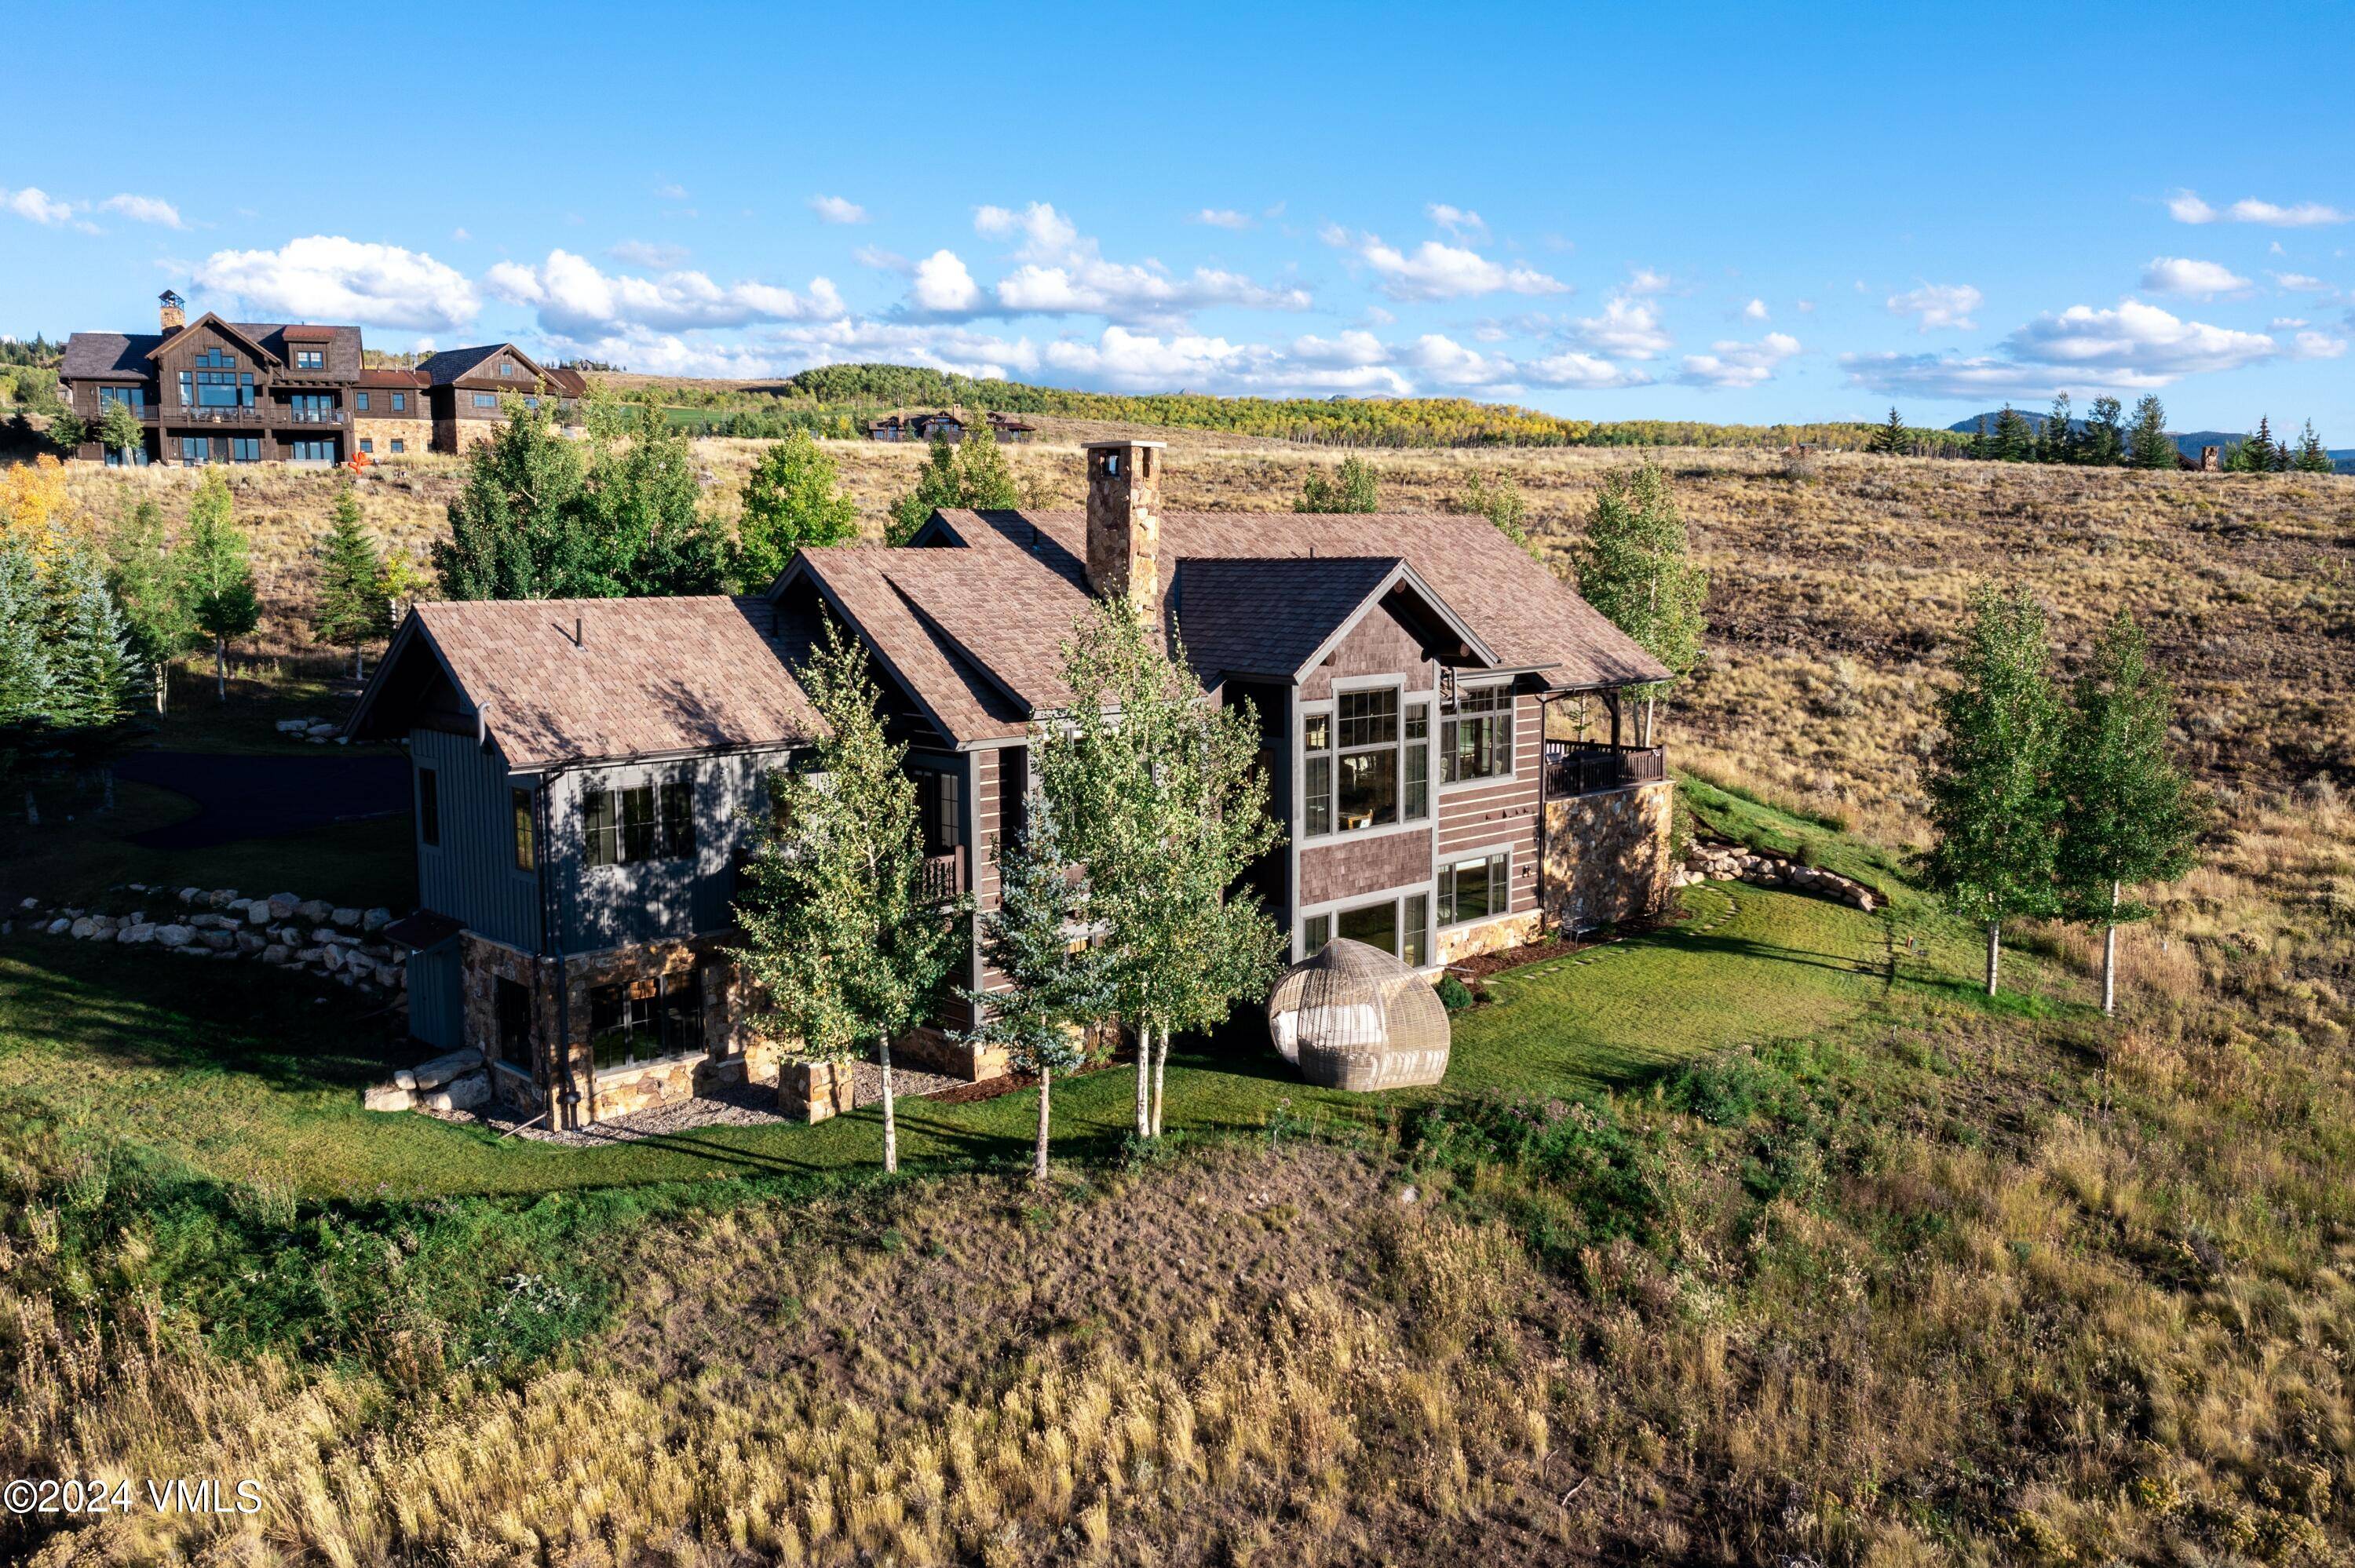 This gorgeous home has some of the best views in the valley.